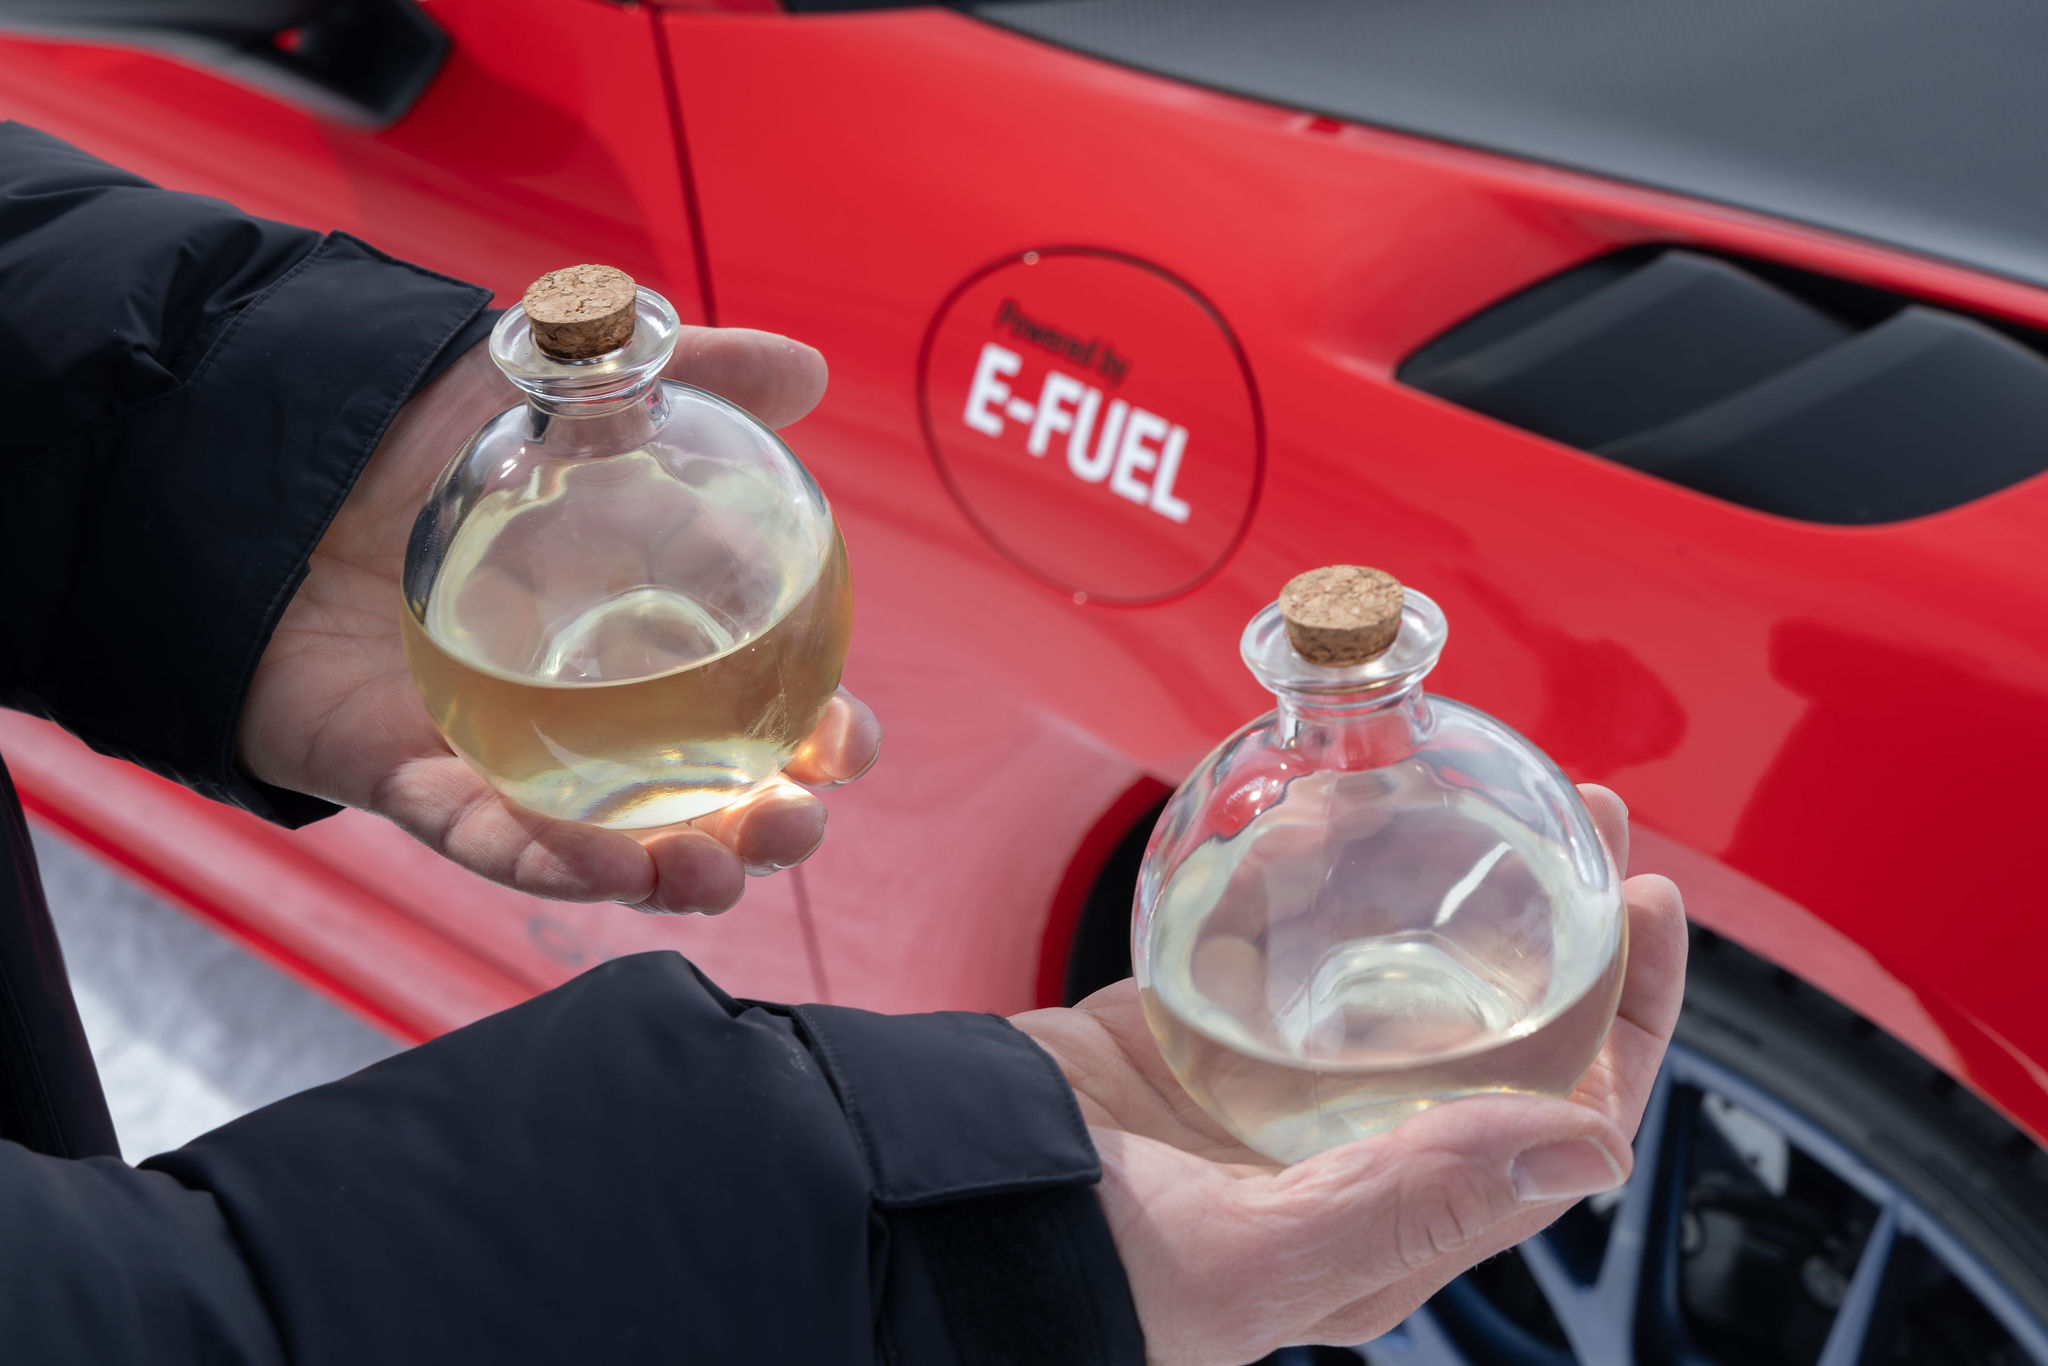 On the left, unleaded 98, on the right, e-fuel // Source: Tibo for Porsche France / Aroged